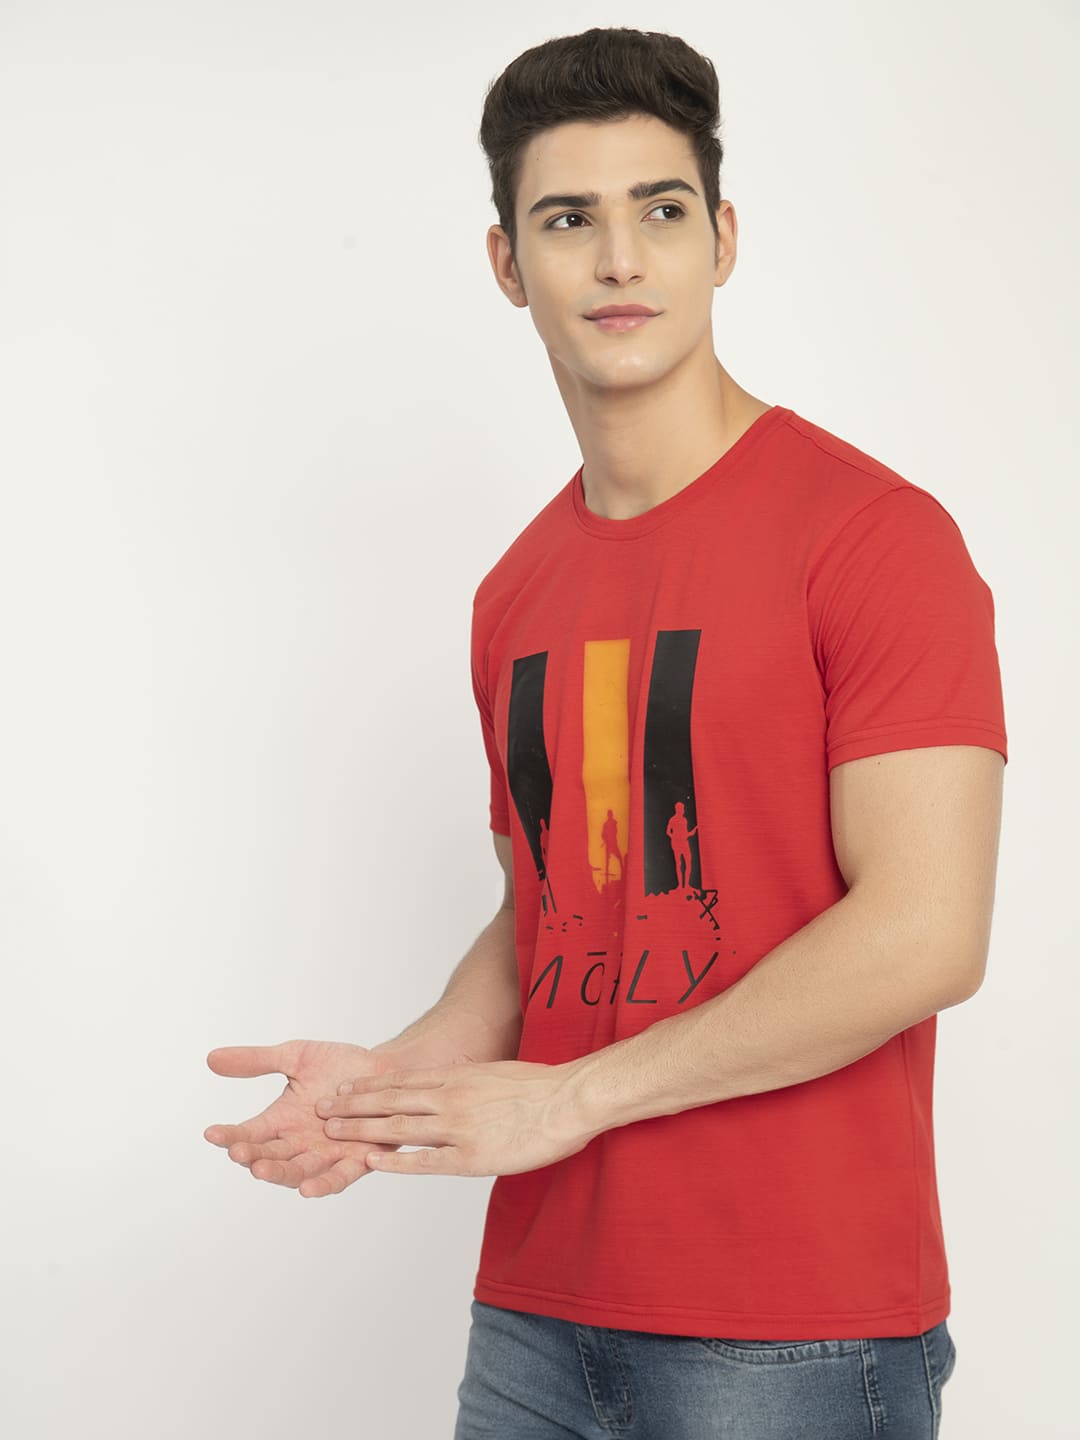 Men’s Printed Round Regular Fit T-Shirt - Red - SQUIREHOOD